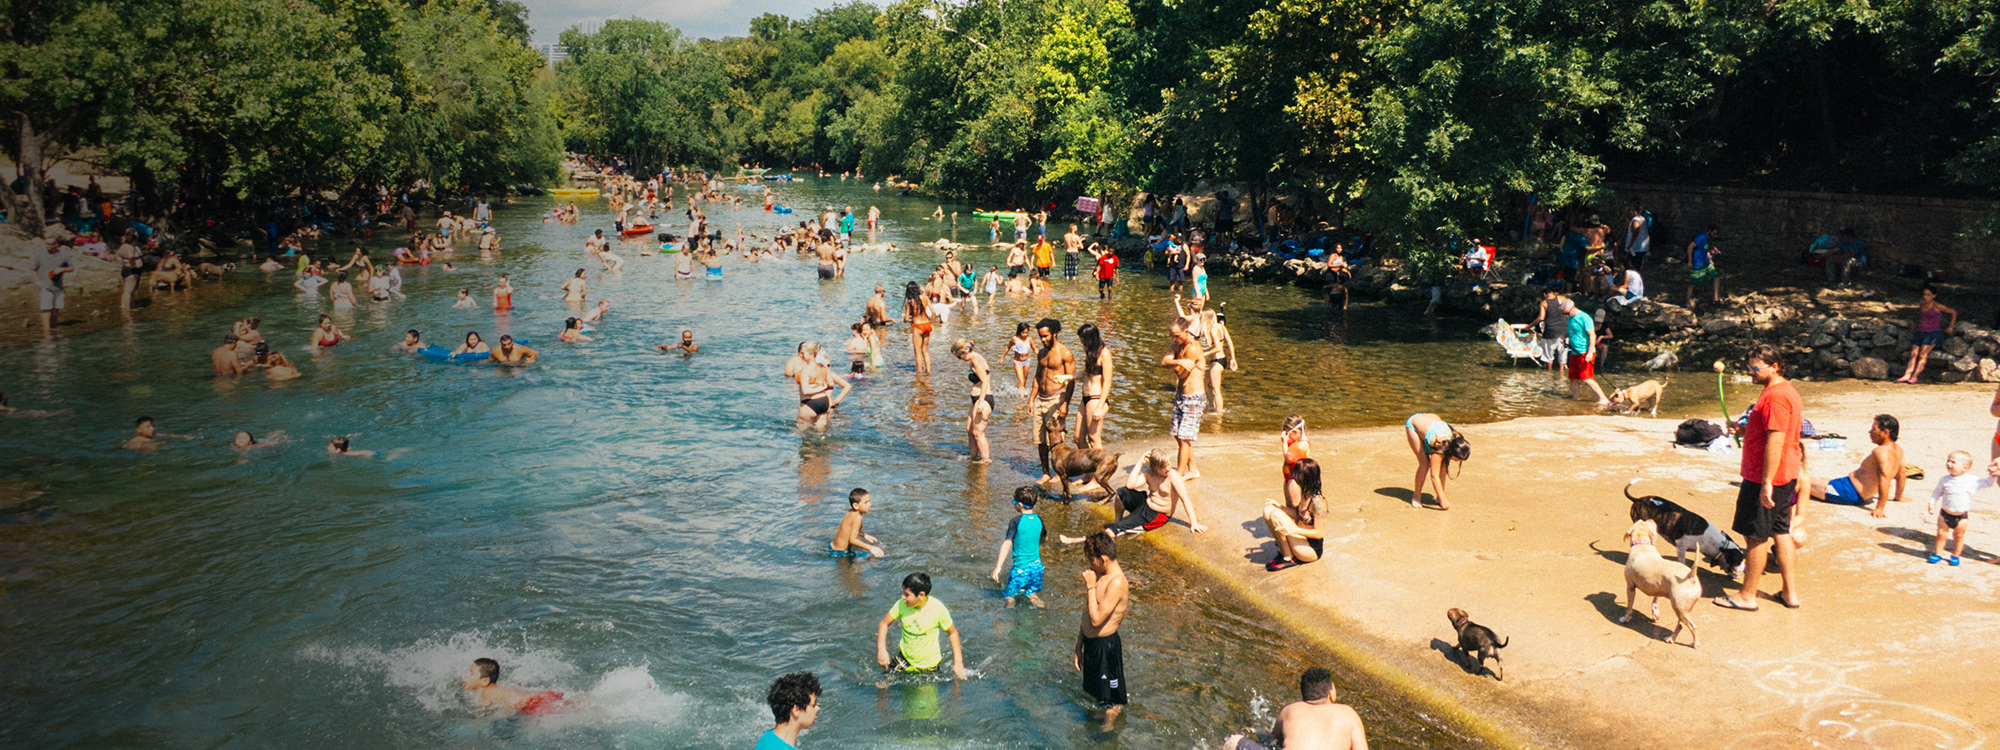 People bathing outdoors during a heatwave